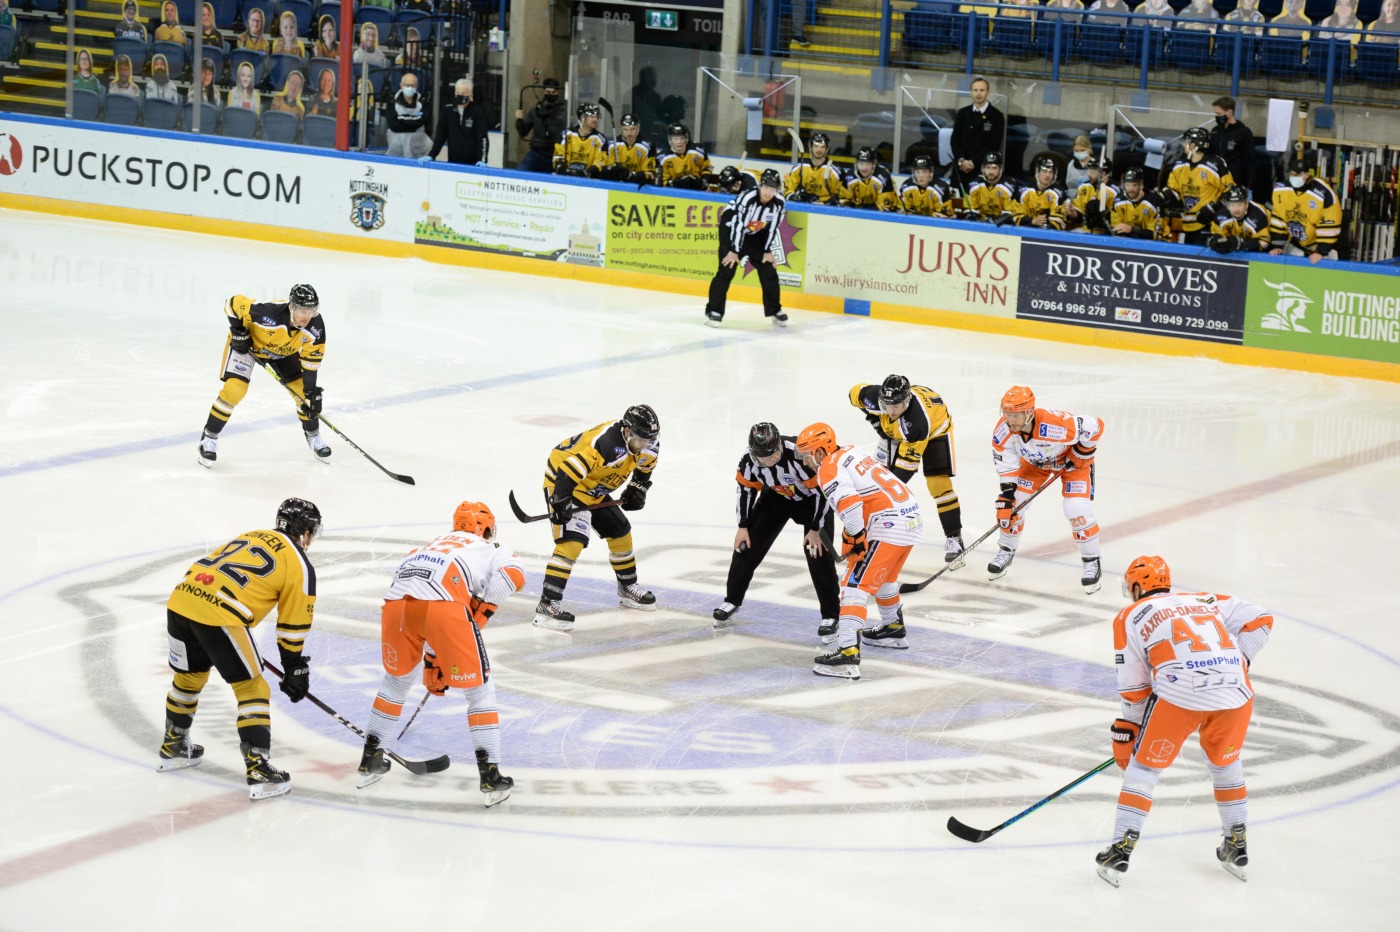 Image: Panthers Images / Dean Woolley